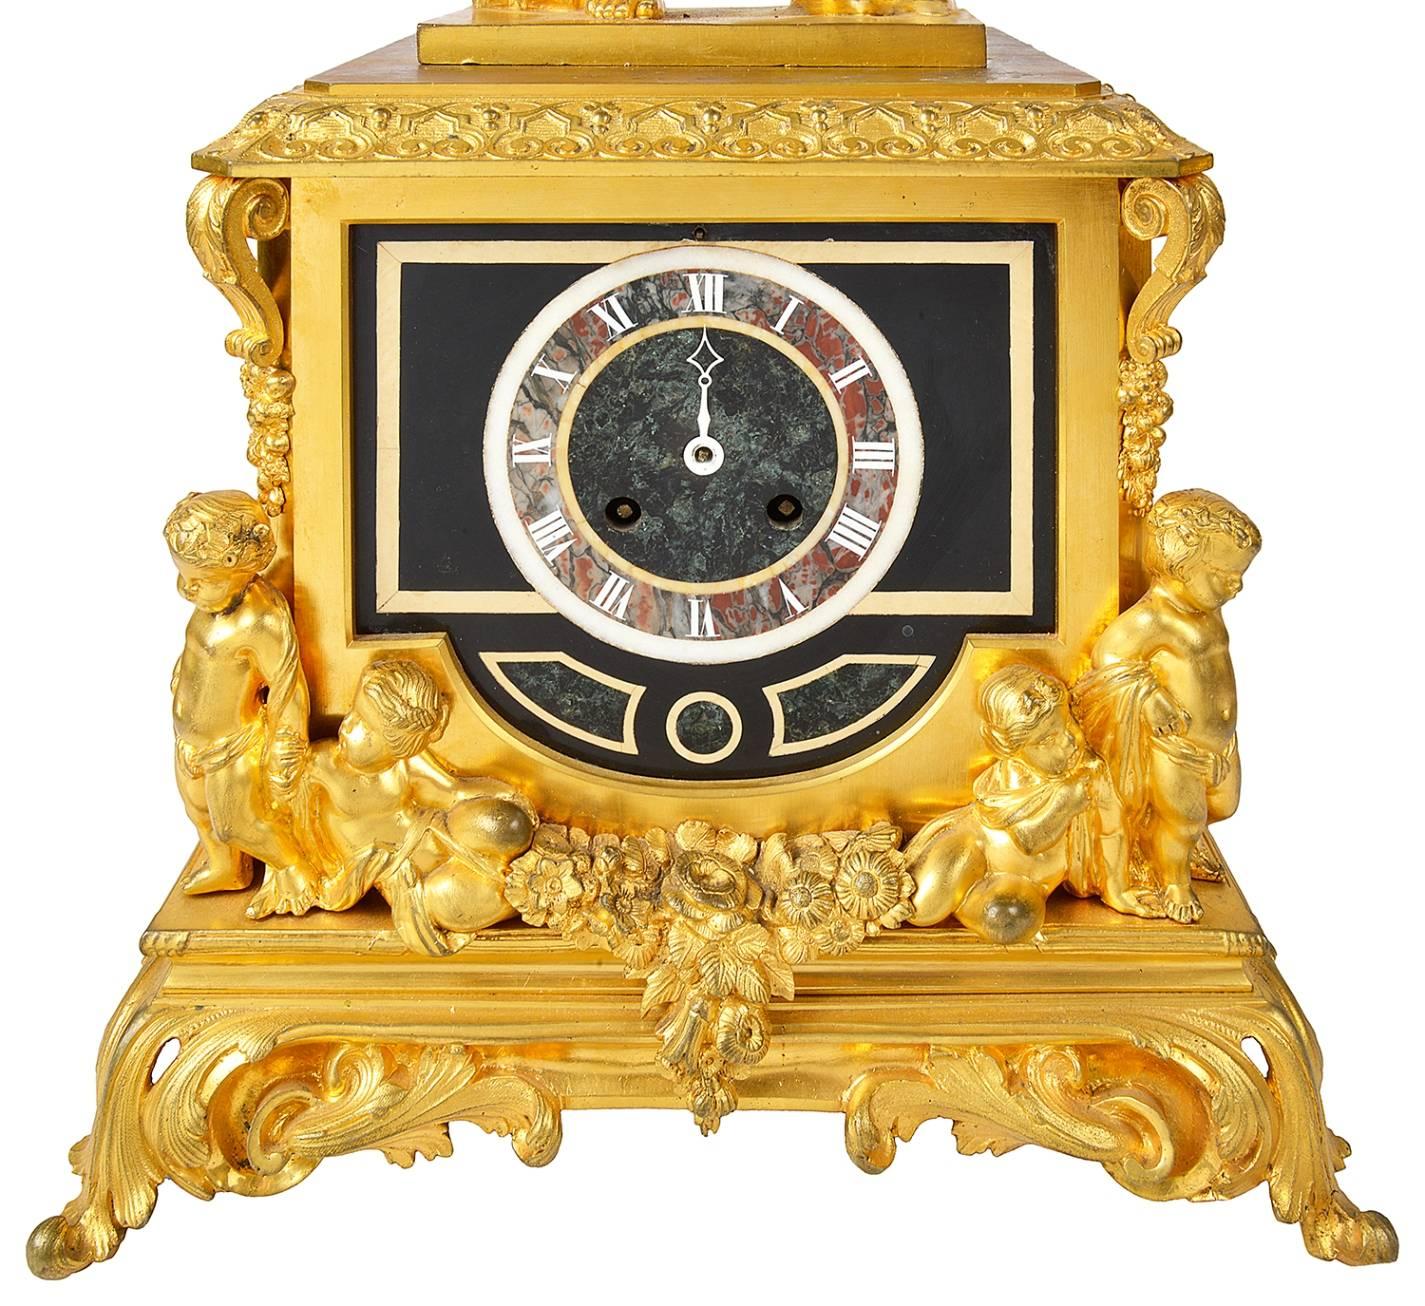 A very good quality 19th century gilded ormolu Louis XVI style clock garniture. The clock having a Classical Roman soldier above a square section clock with inlaid marble clock face and supported by cherubs with swags.
The pair of candelabra each